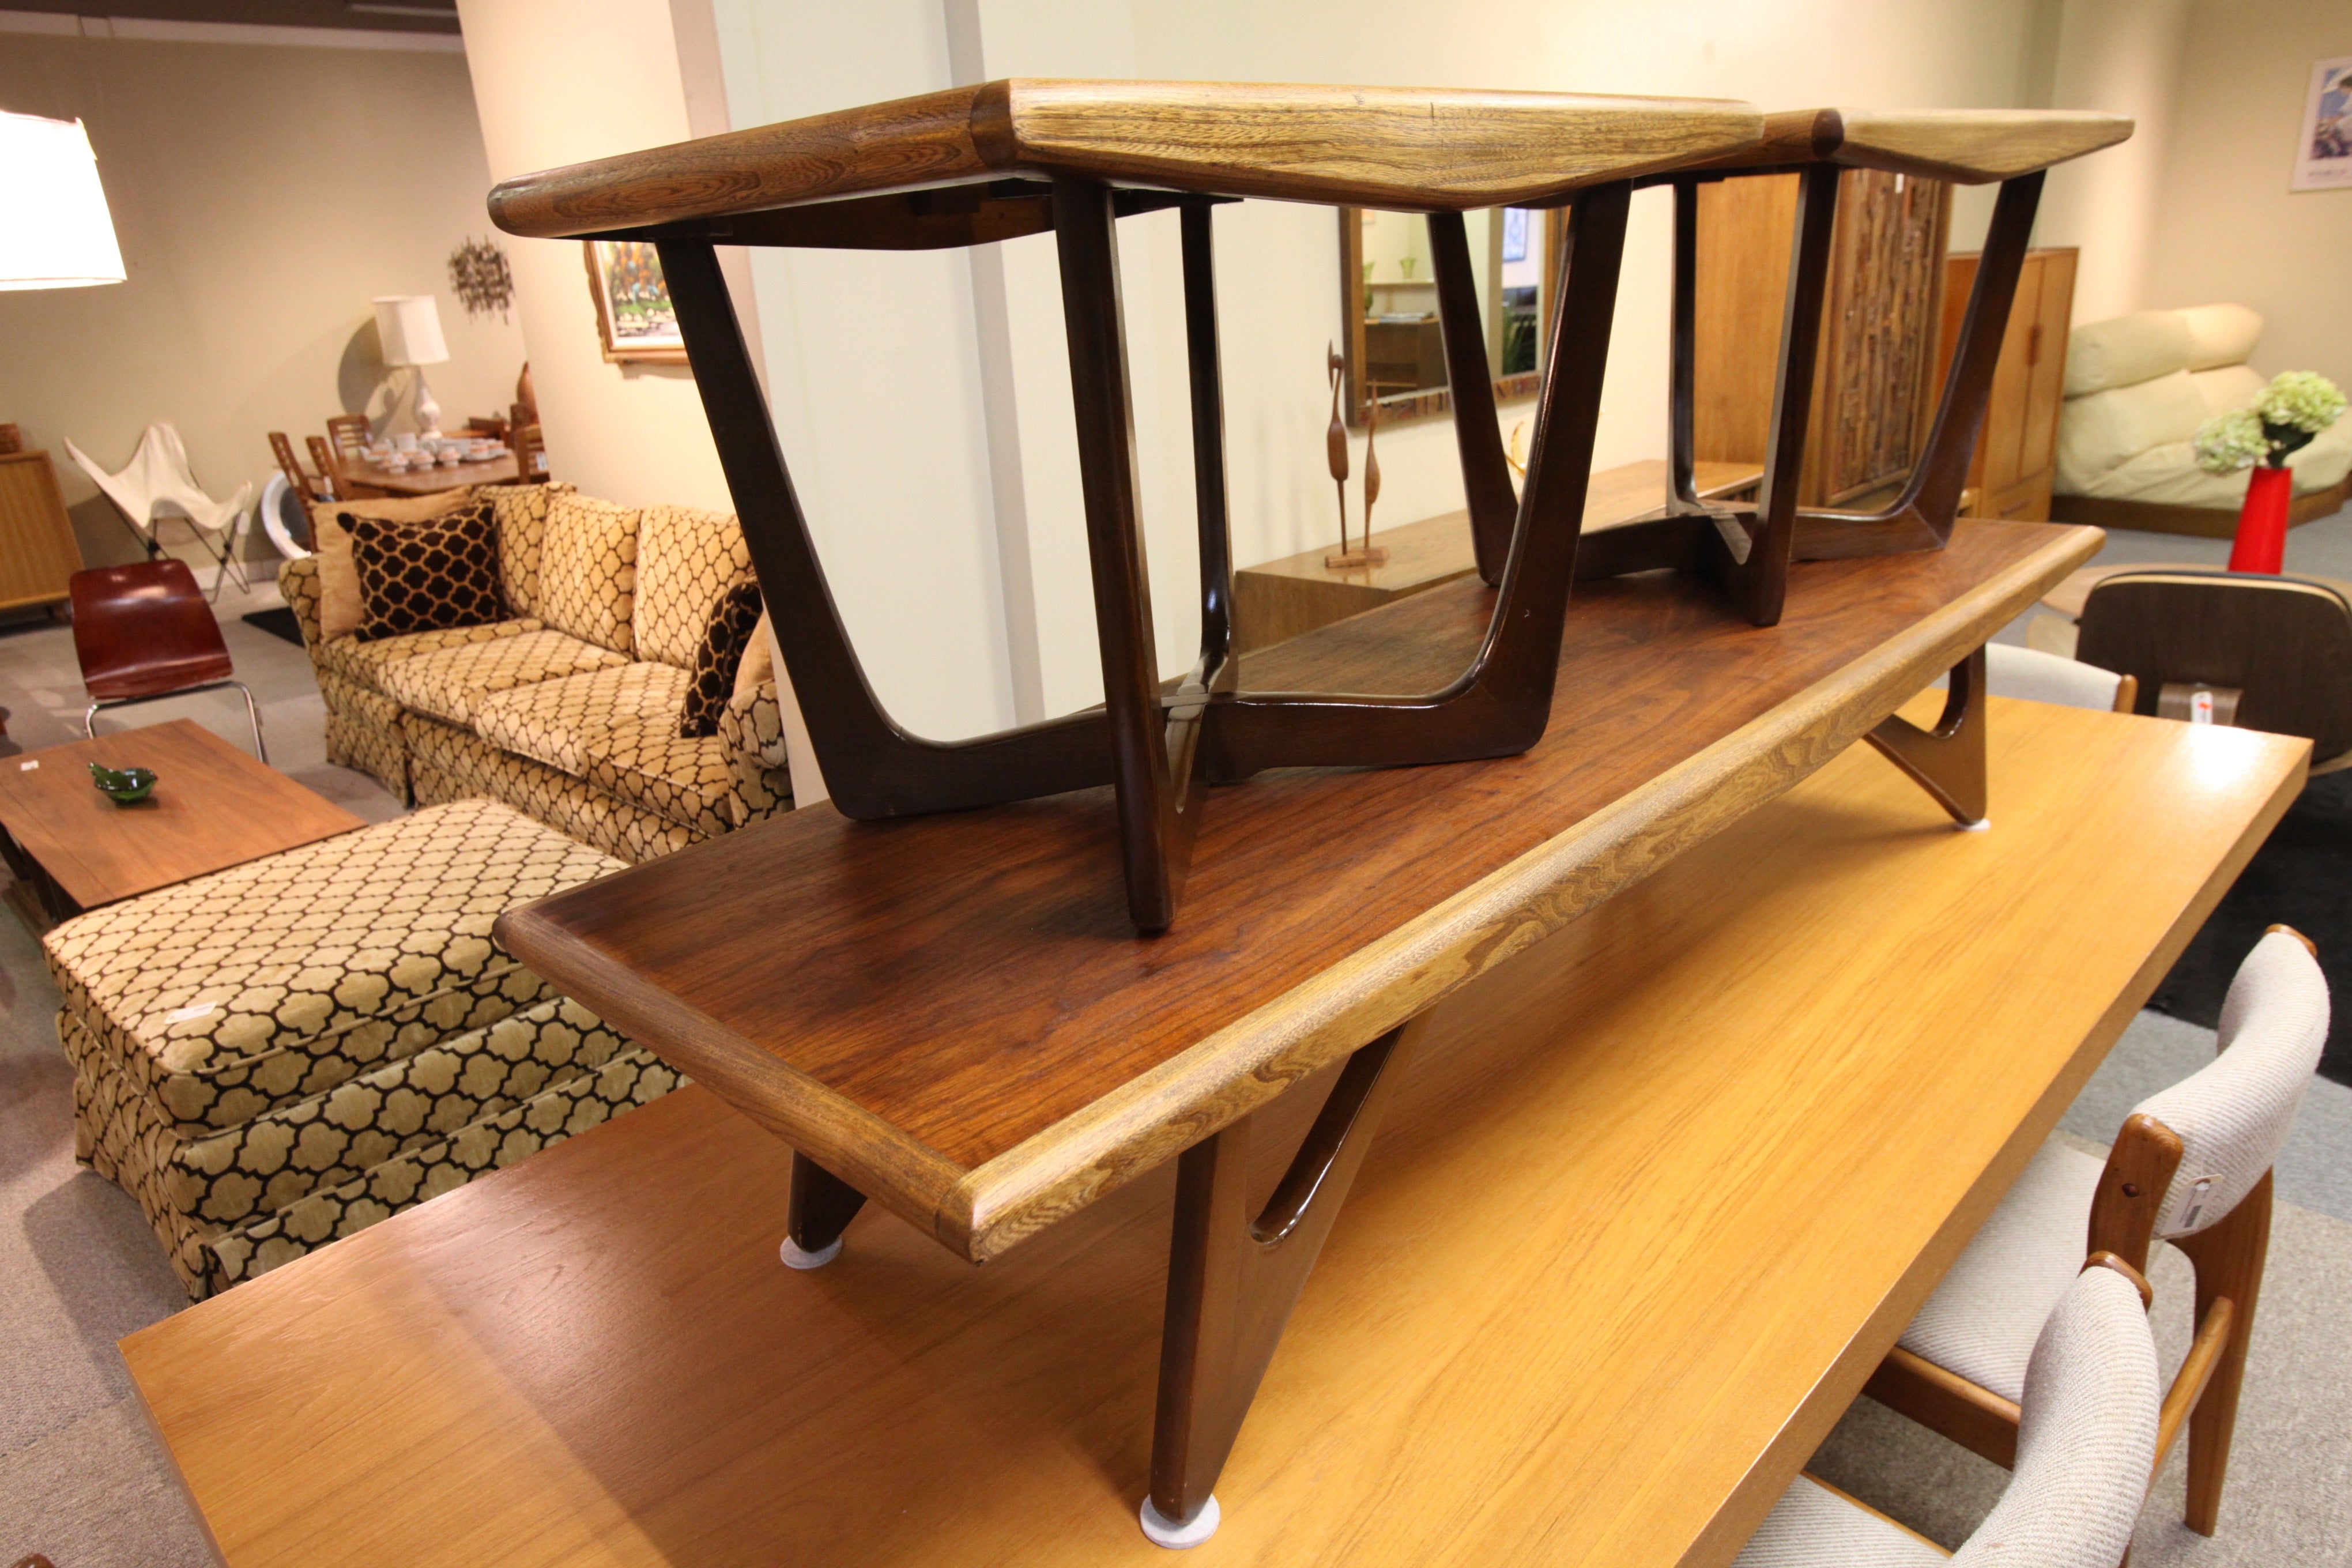 Kroehler - Adrian Pearsall Style Coffee Table (70"L x 22"W x 13.5"H)